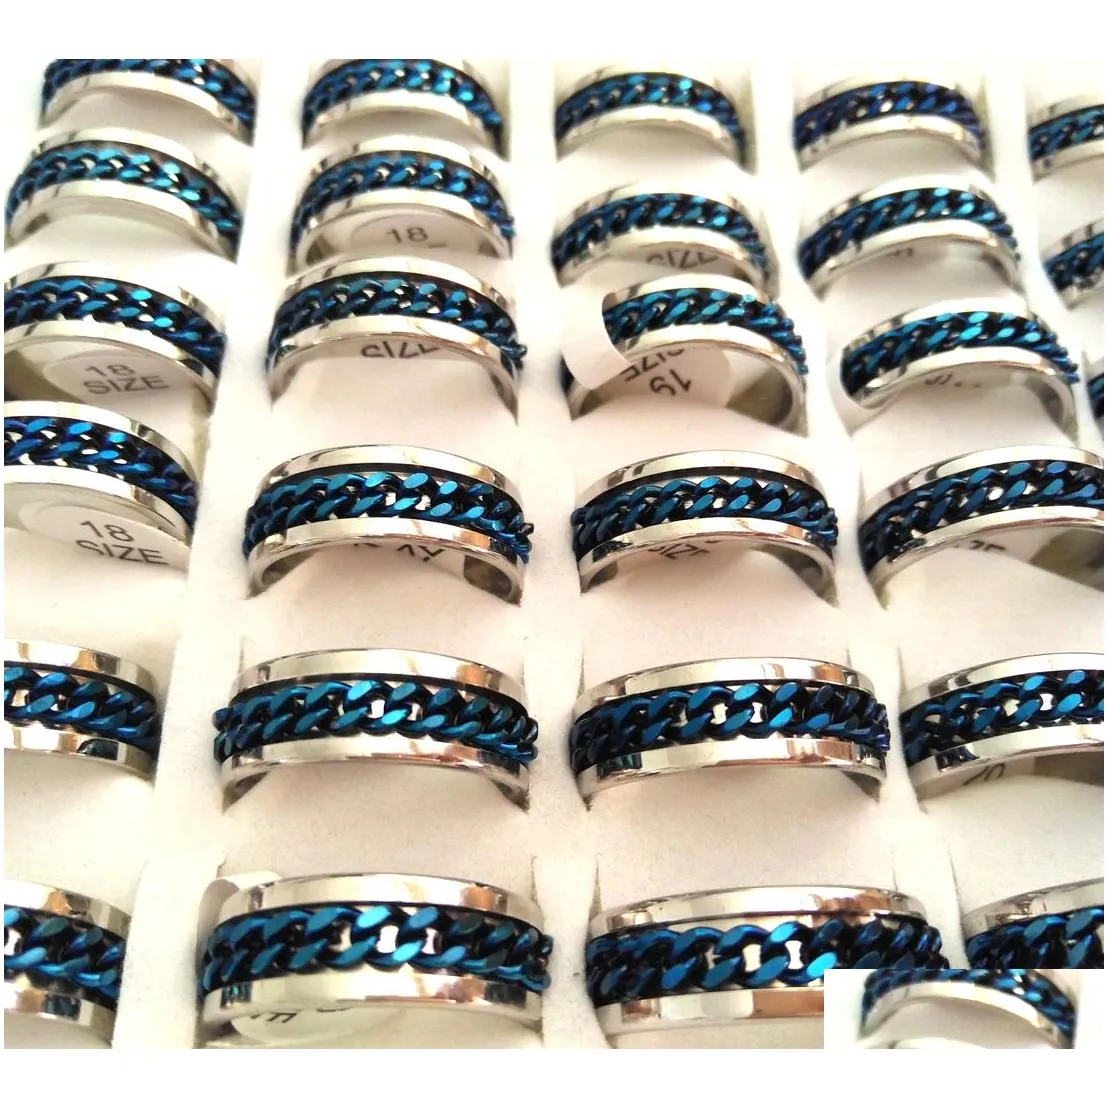 50pcs spin chain ring mens boys cool rock punk 316l stainless steel spinner ring man accessories birthday gift xmas gift 4 colors